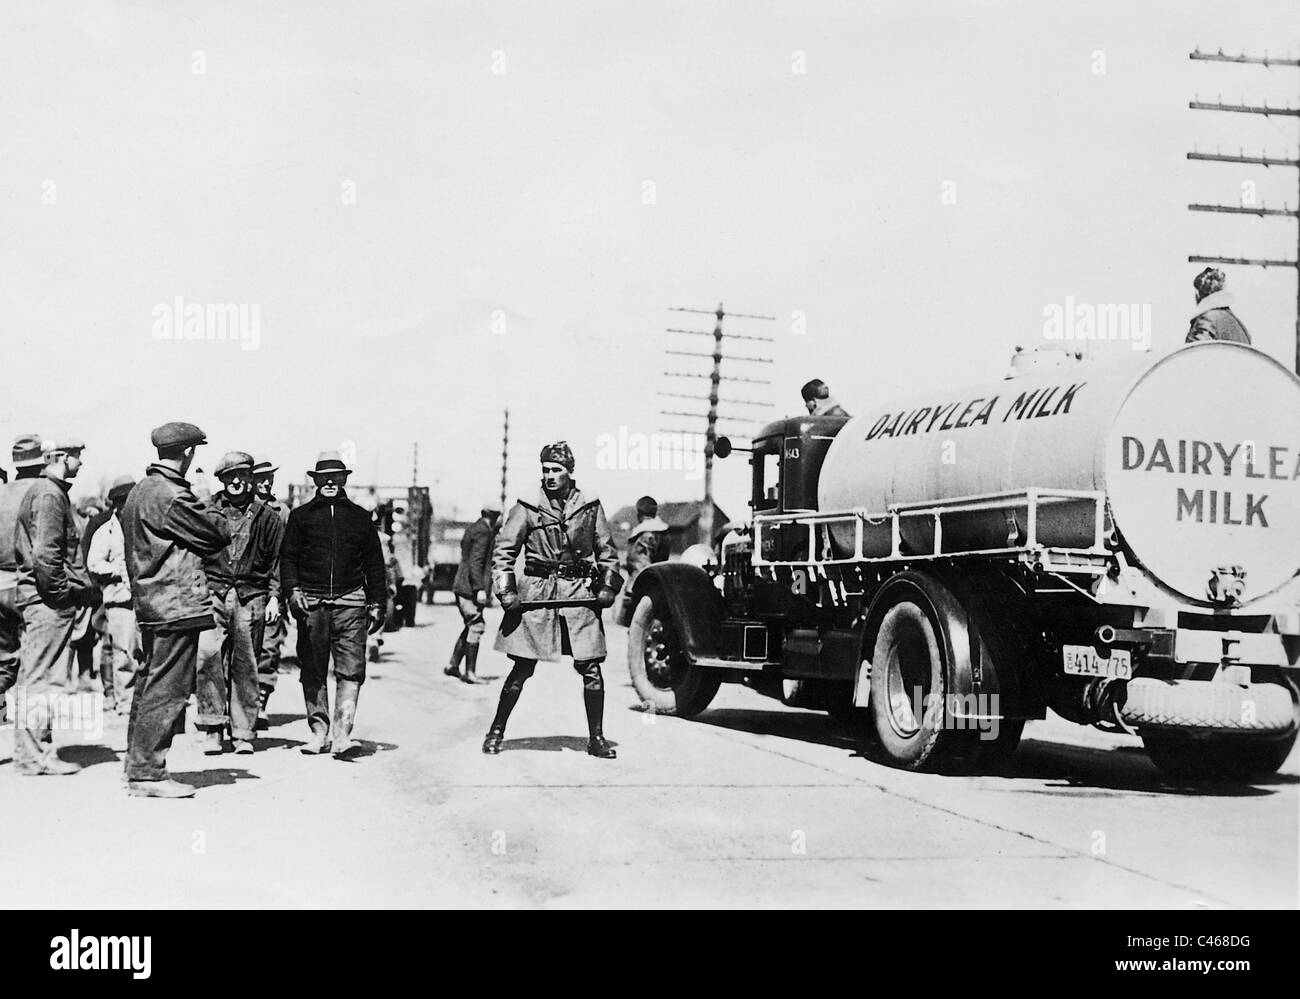 Milk truck during the Depression, 1932 Stock Photo